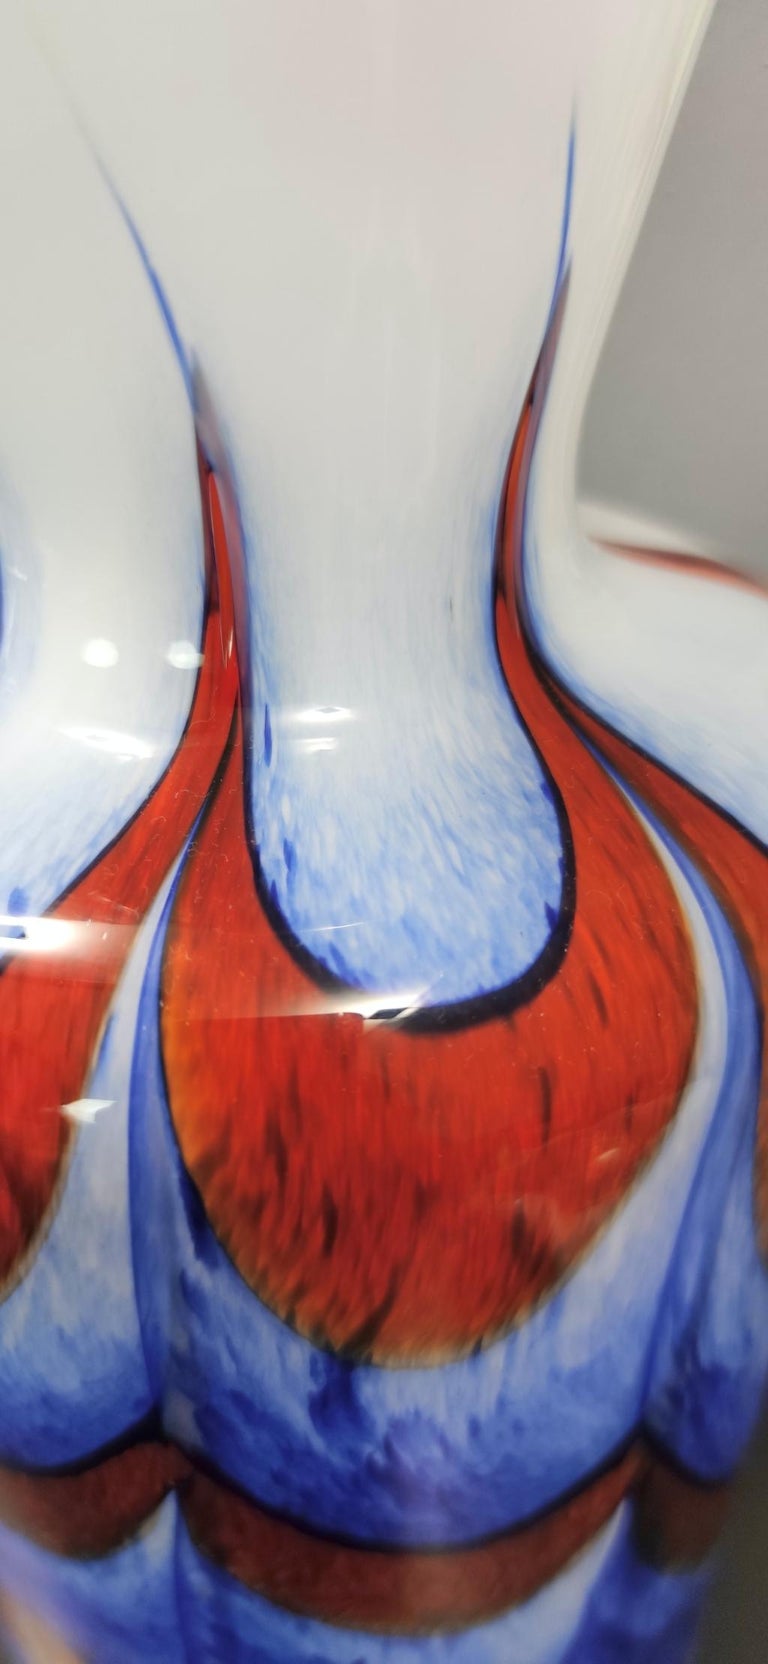 Vintage Red, White and Blue Murano Glass Vase by Carlo Moretti, Italy 1970s For Sale 5